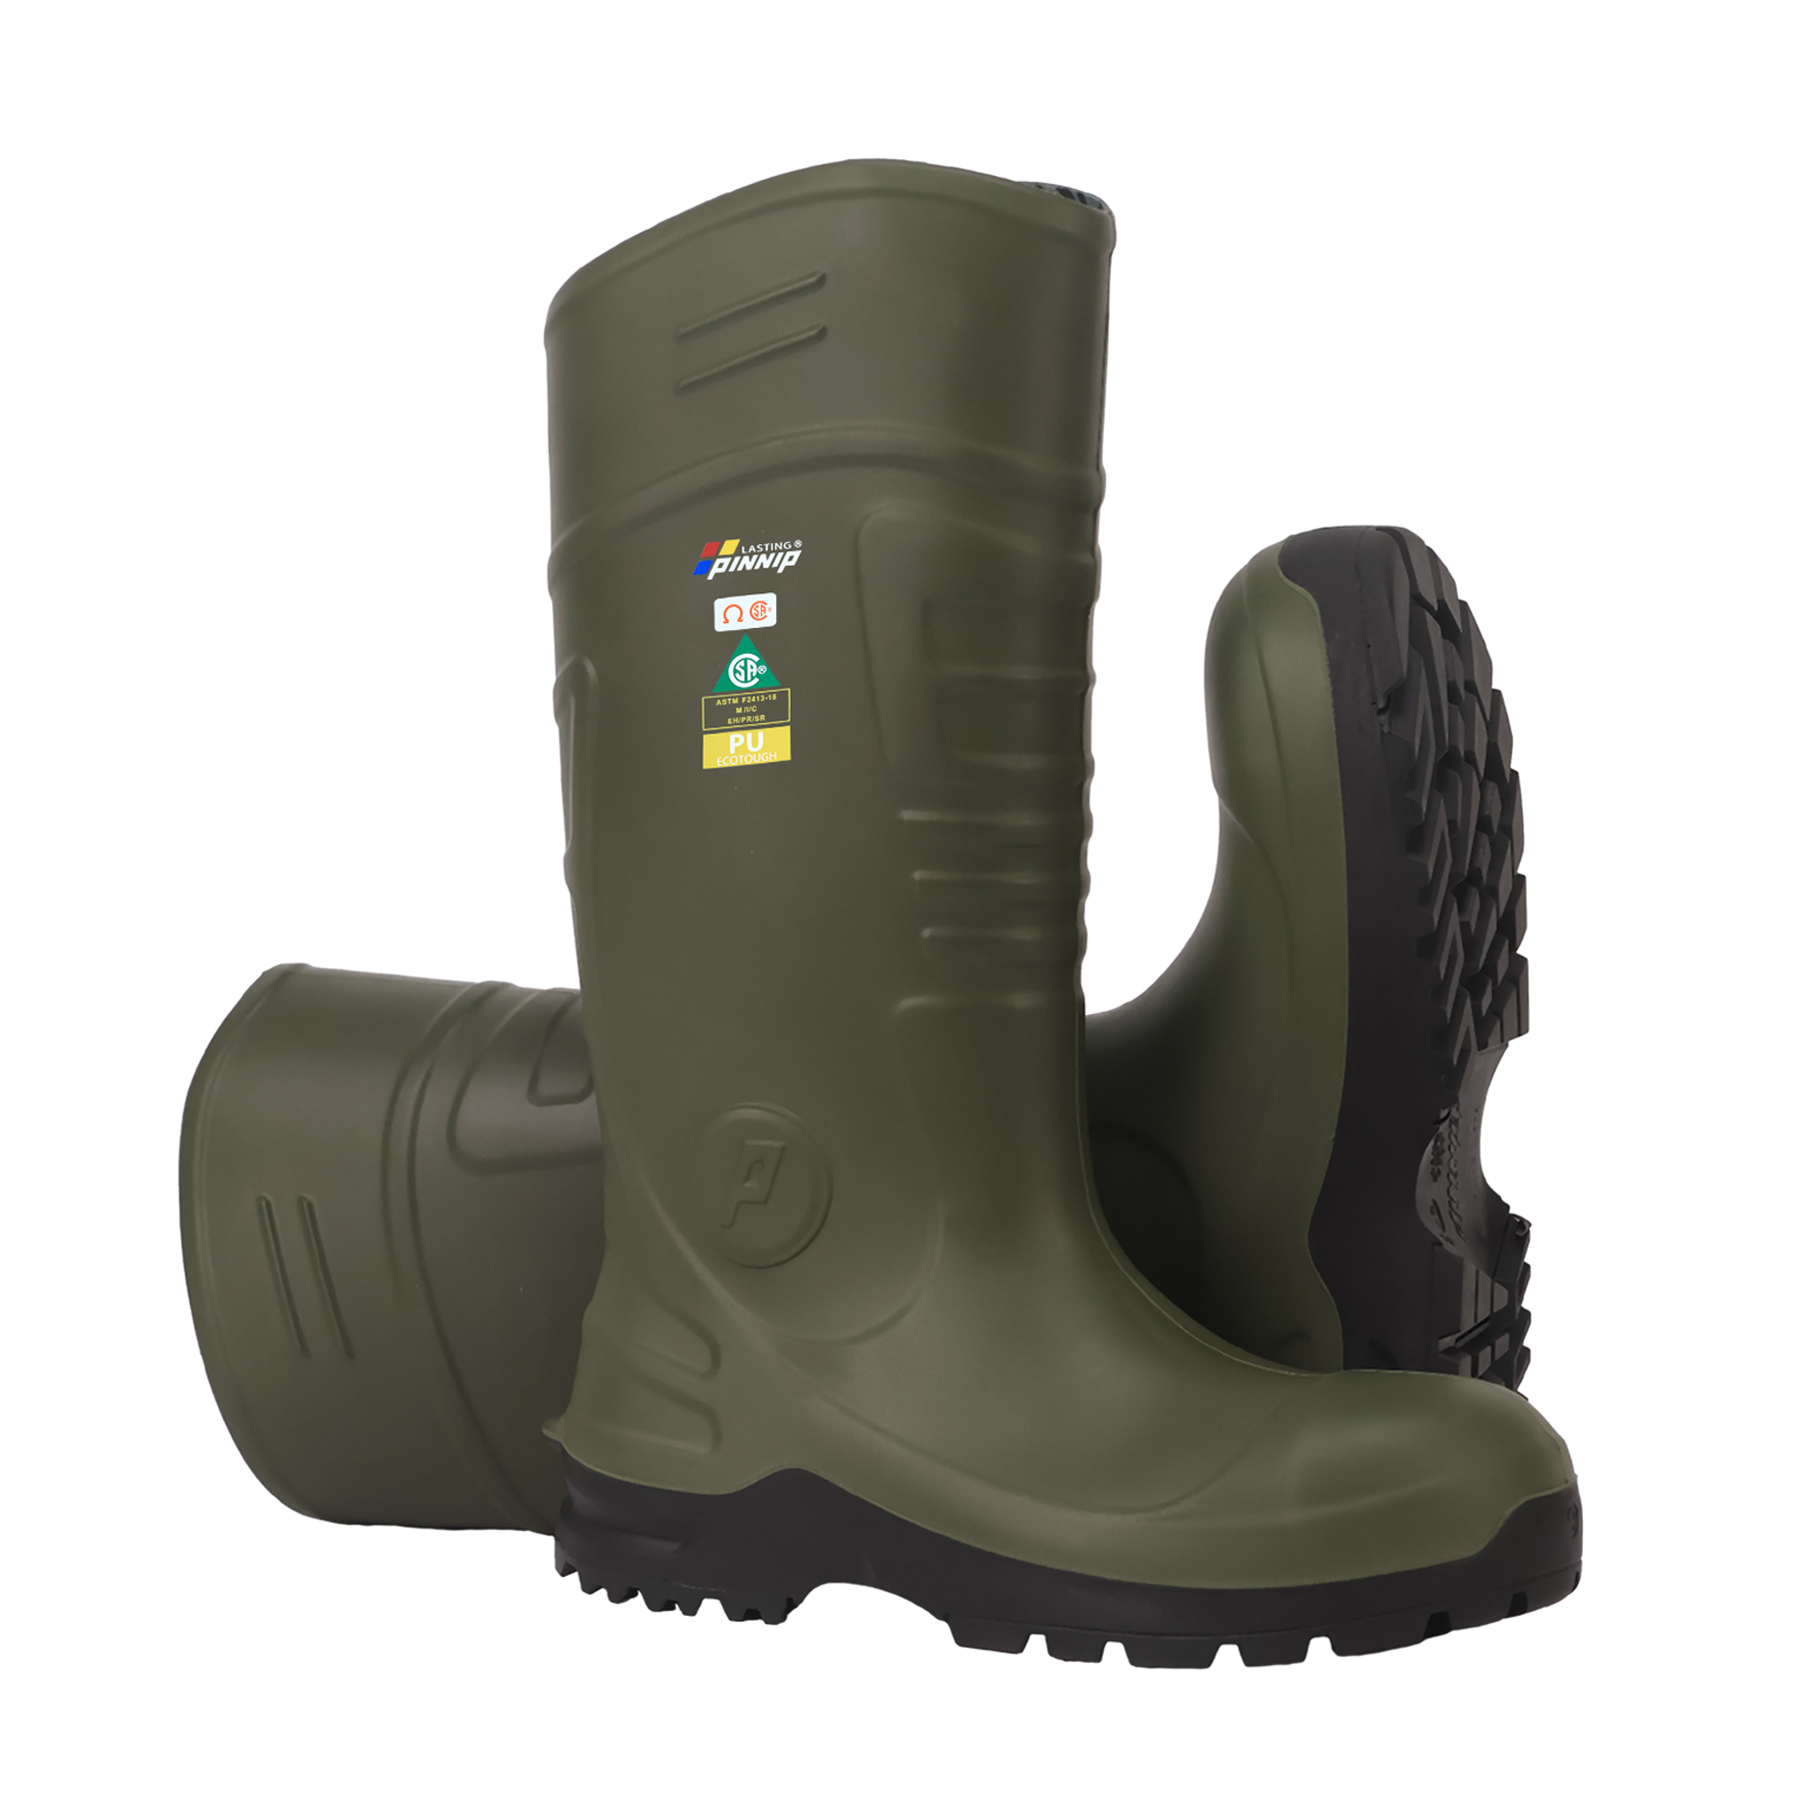 Infinix protective boots-Green, safety boots, steel toe boots, non-slip boots.